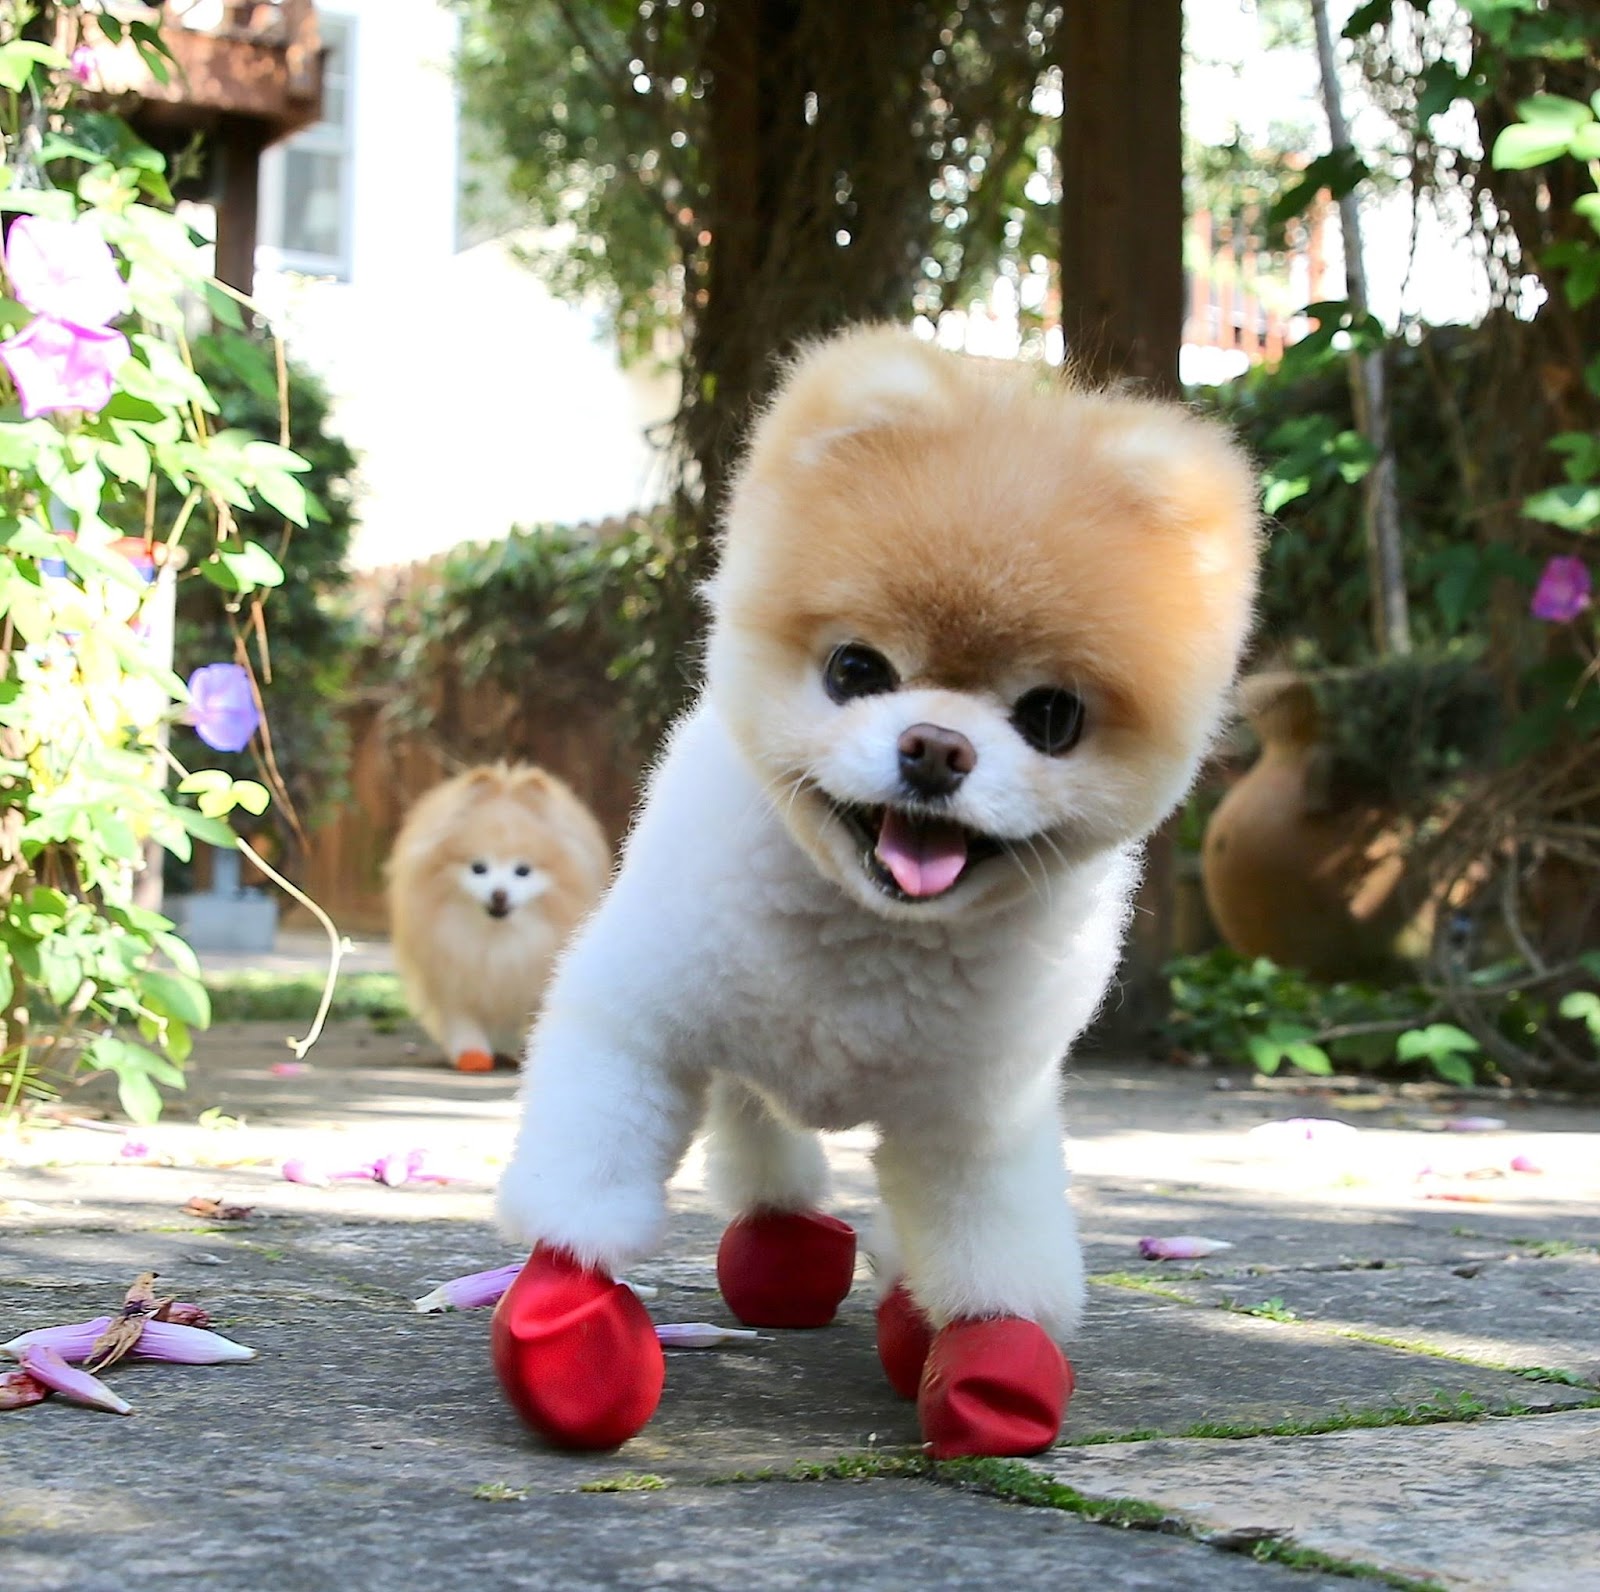 The 1709 Blog The World’s Cutest Dog too commonly shaped